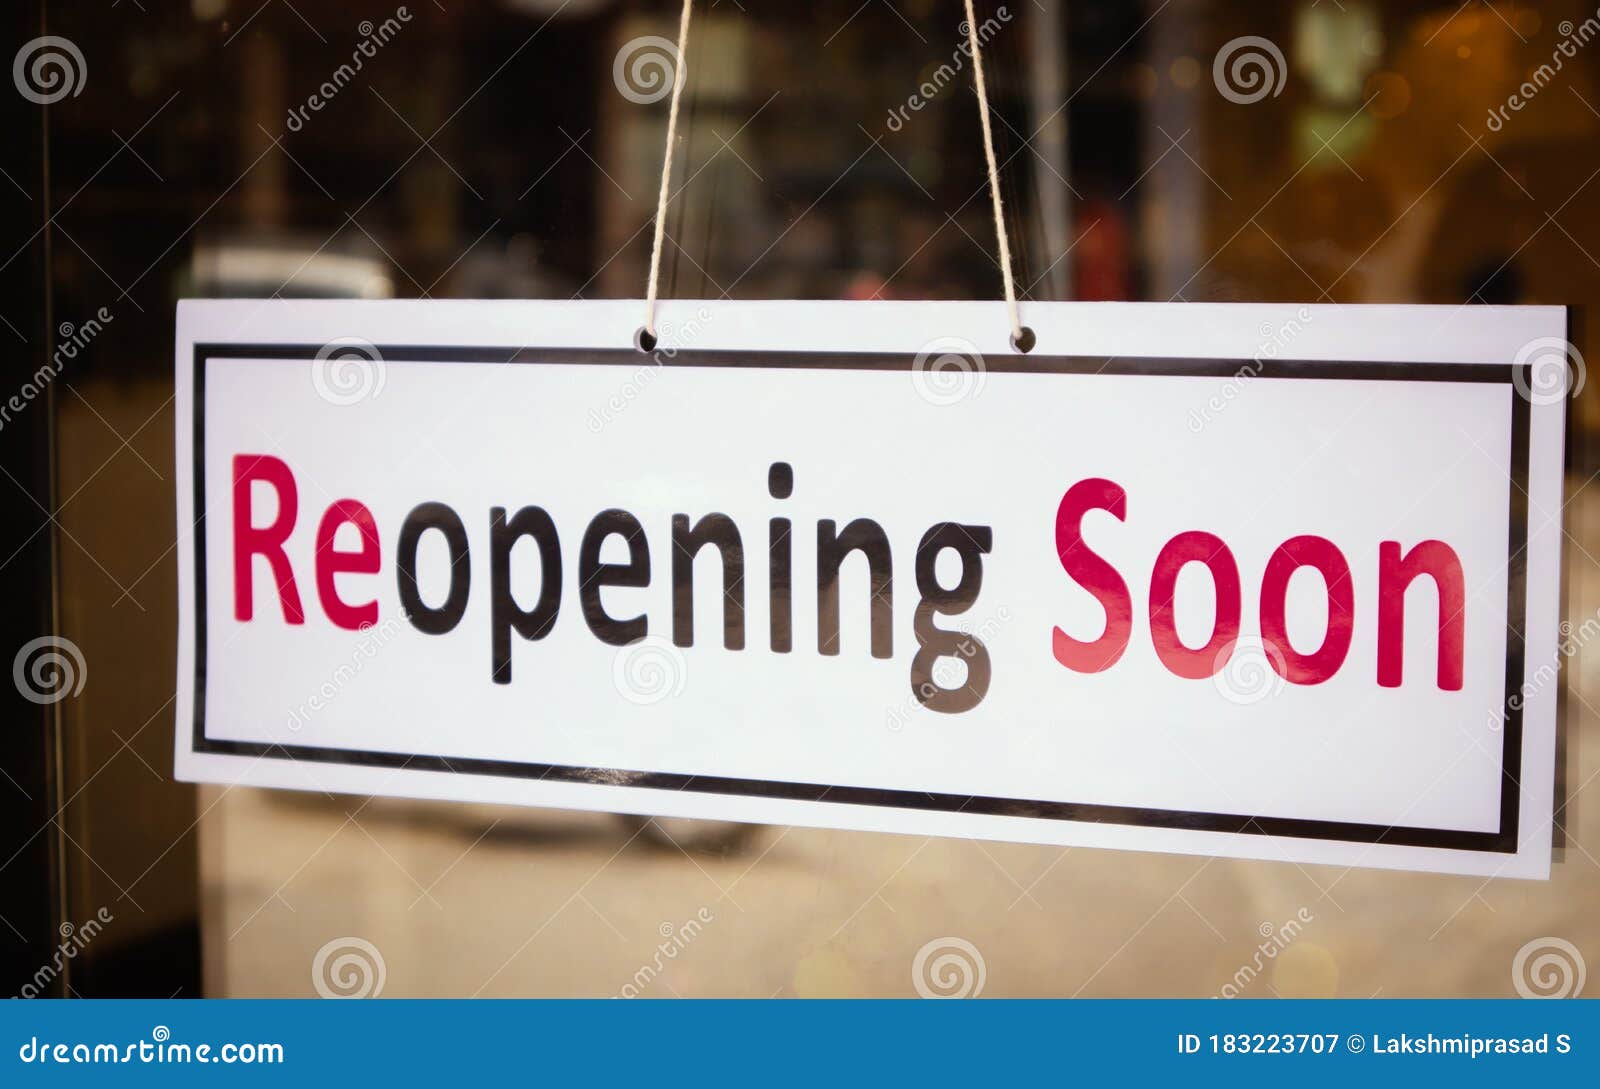 reopening soon signage board in front of businesses or restaurant door after covid-19 or coronavirus outbreak - concept